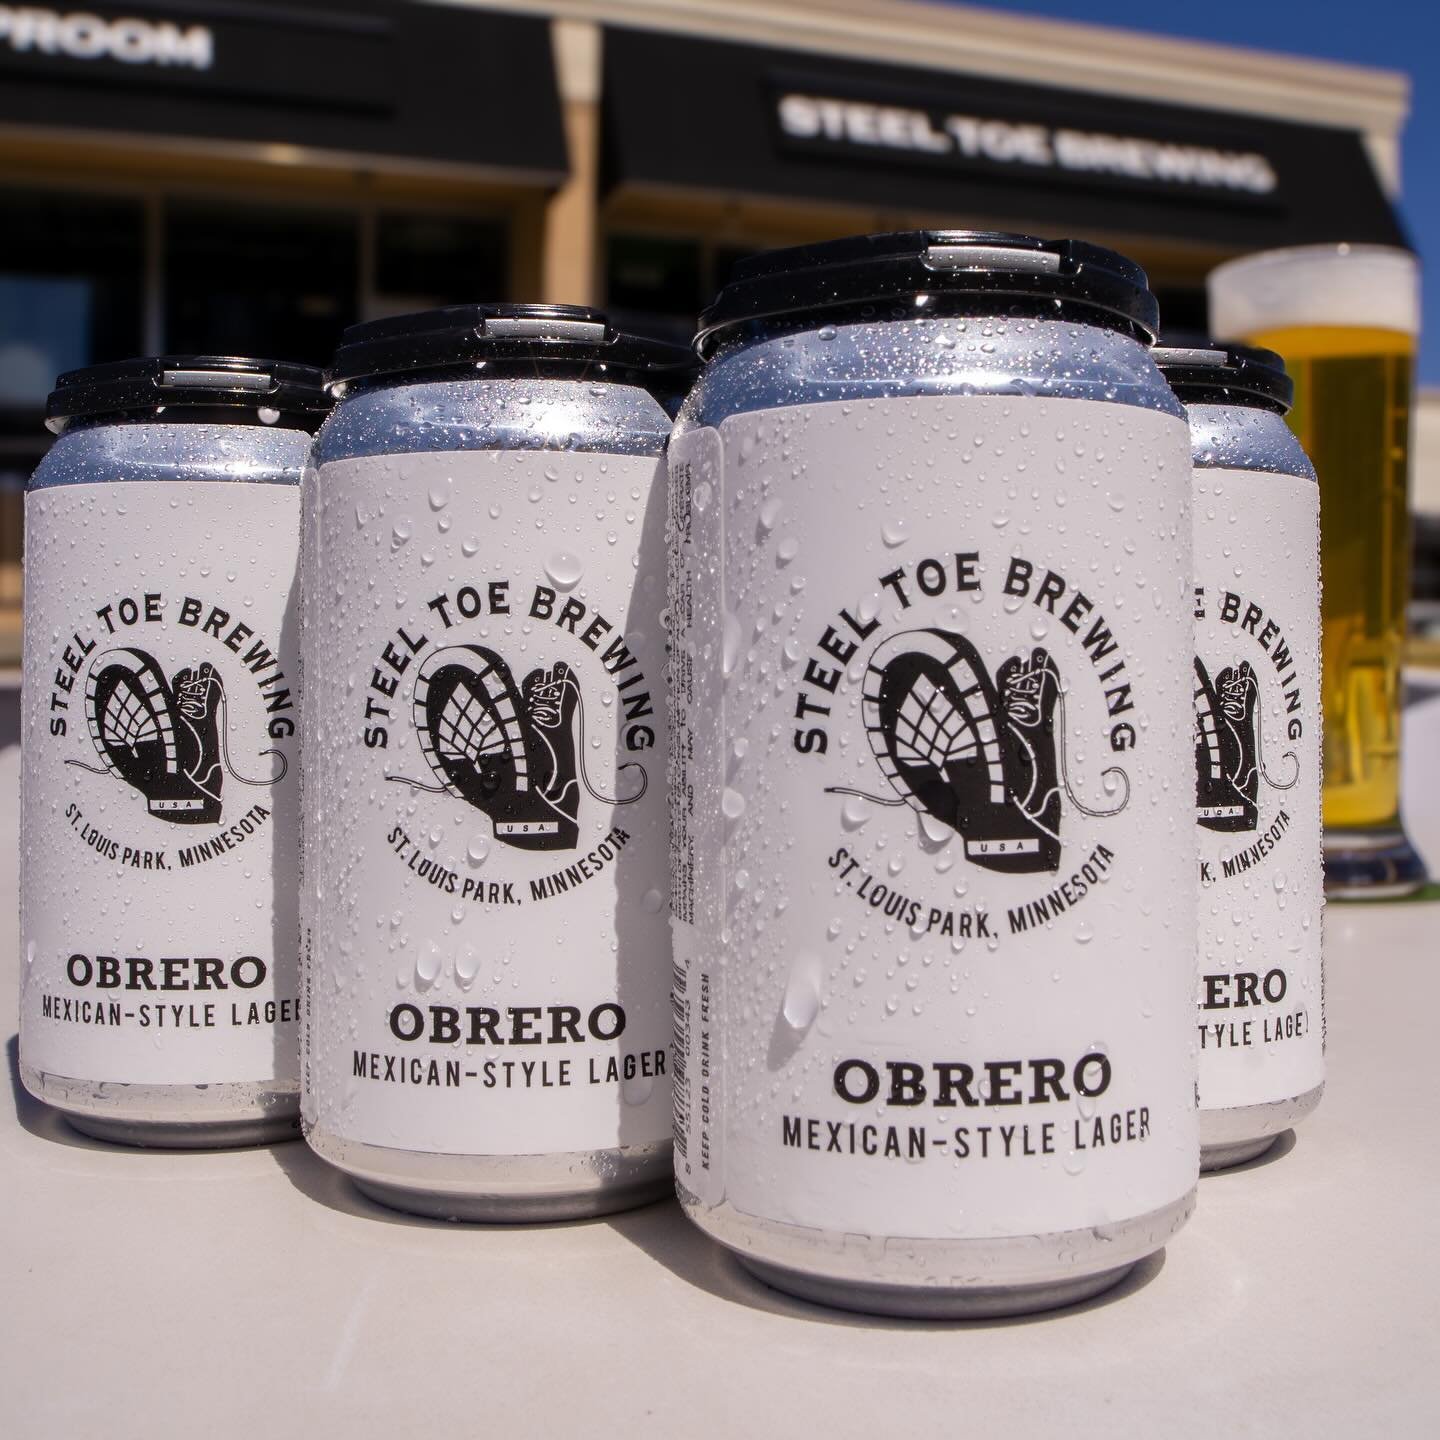 🍻🇲🇽 Obrero Mexican Lager has returned! Just in time for patio season! 🥾🍻

Brewed with malted barley &amp; flaked maize, Obrero is straw gold in colorr with a pillowy white foam. Subtle aromas of tropical paradise make this beer like drinking a s